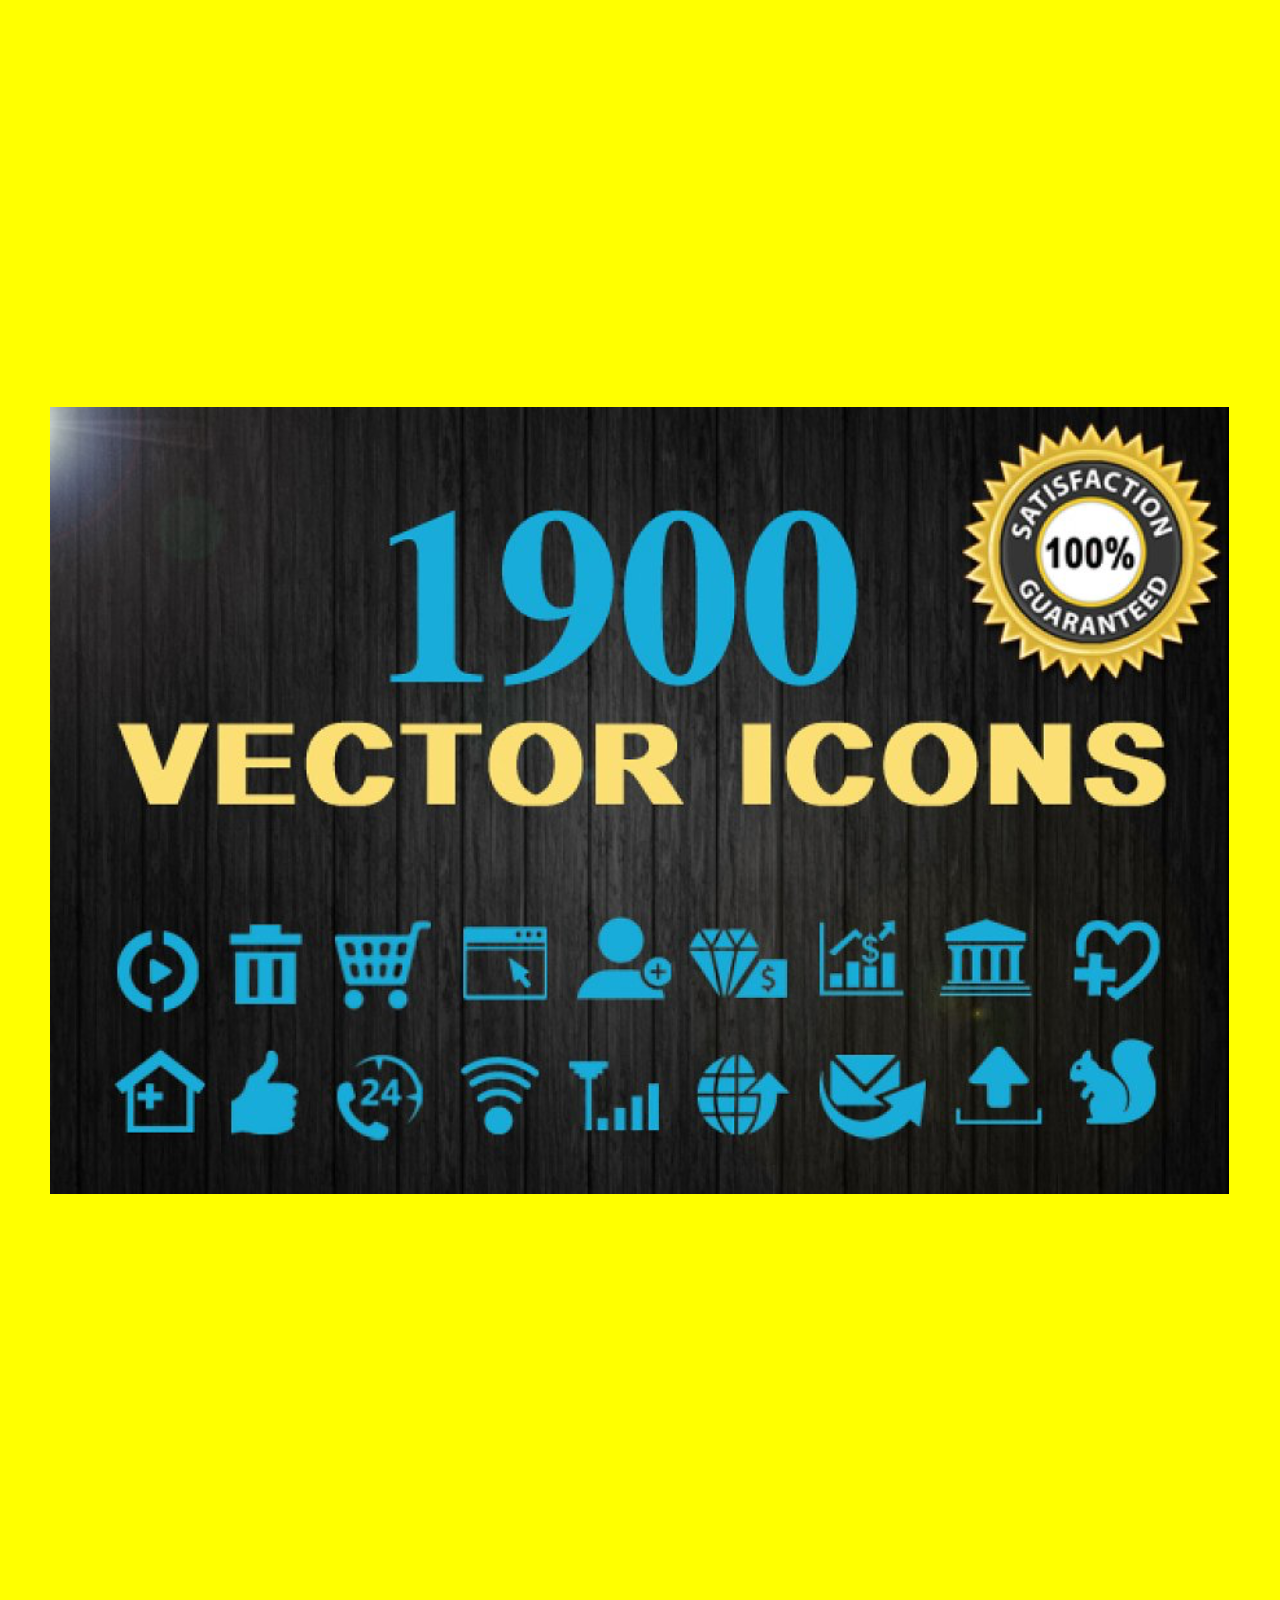 1900 vector icons pinterest image.